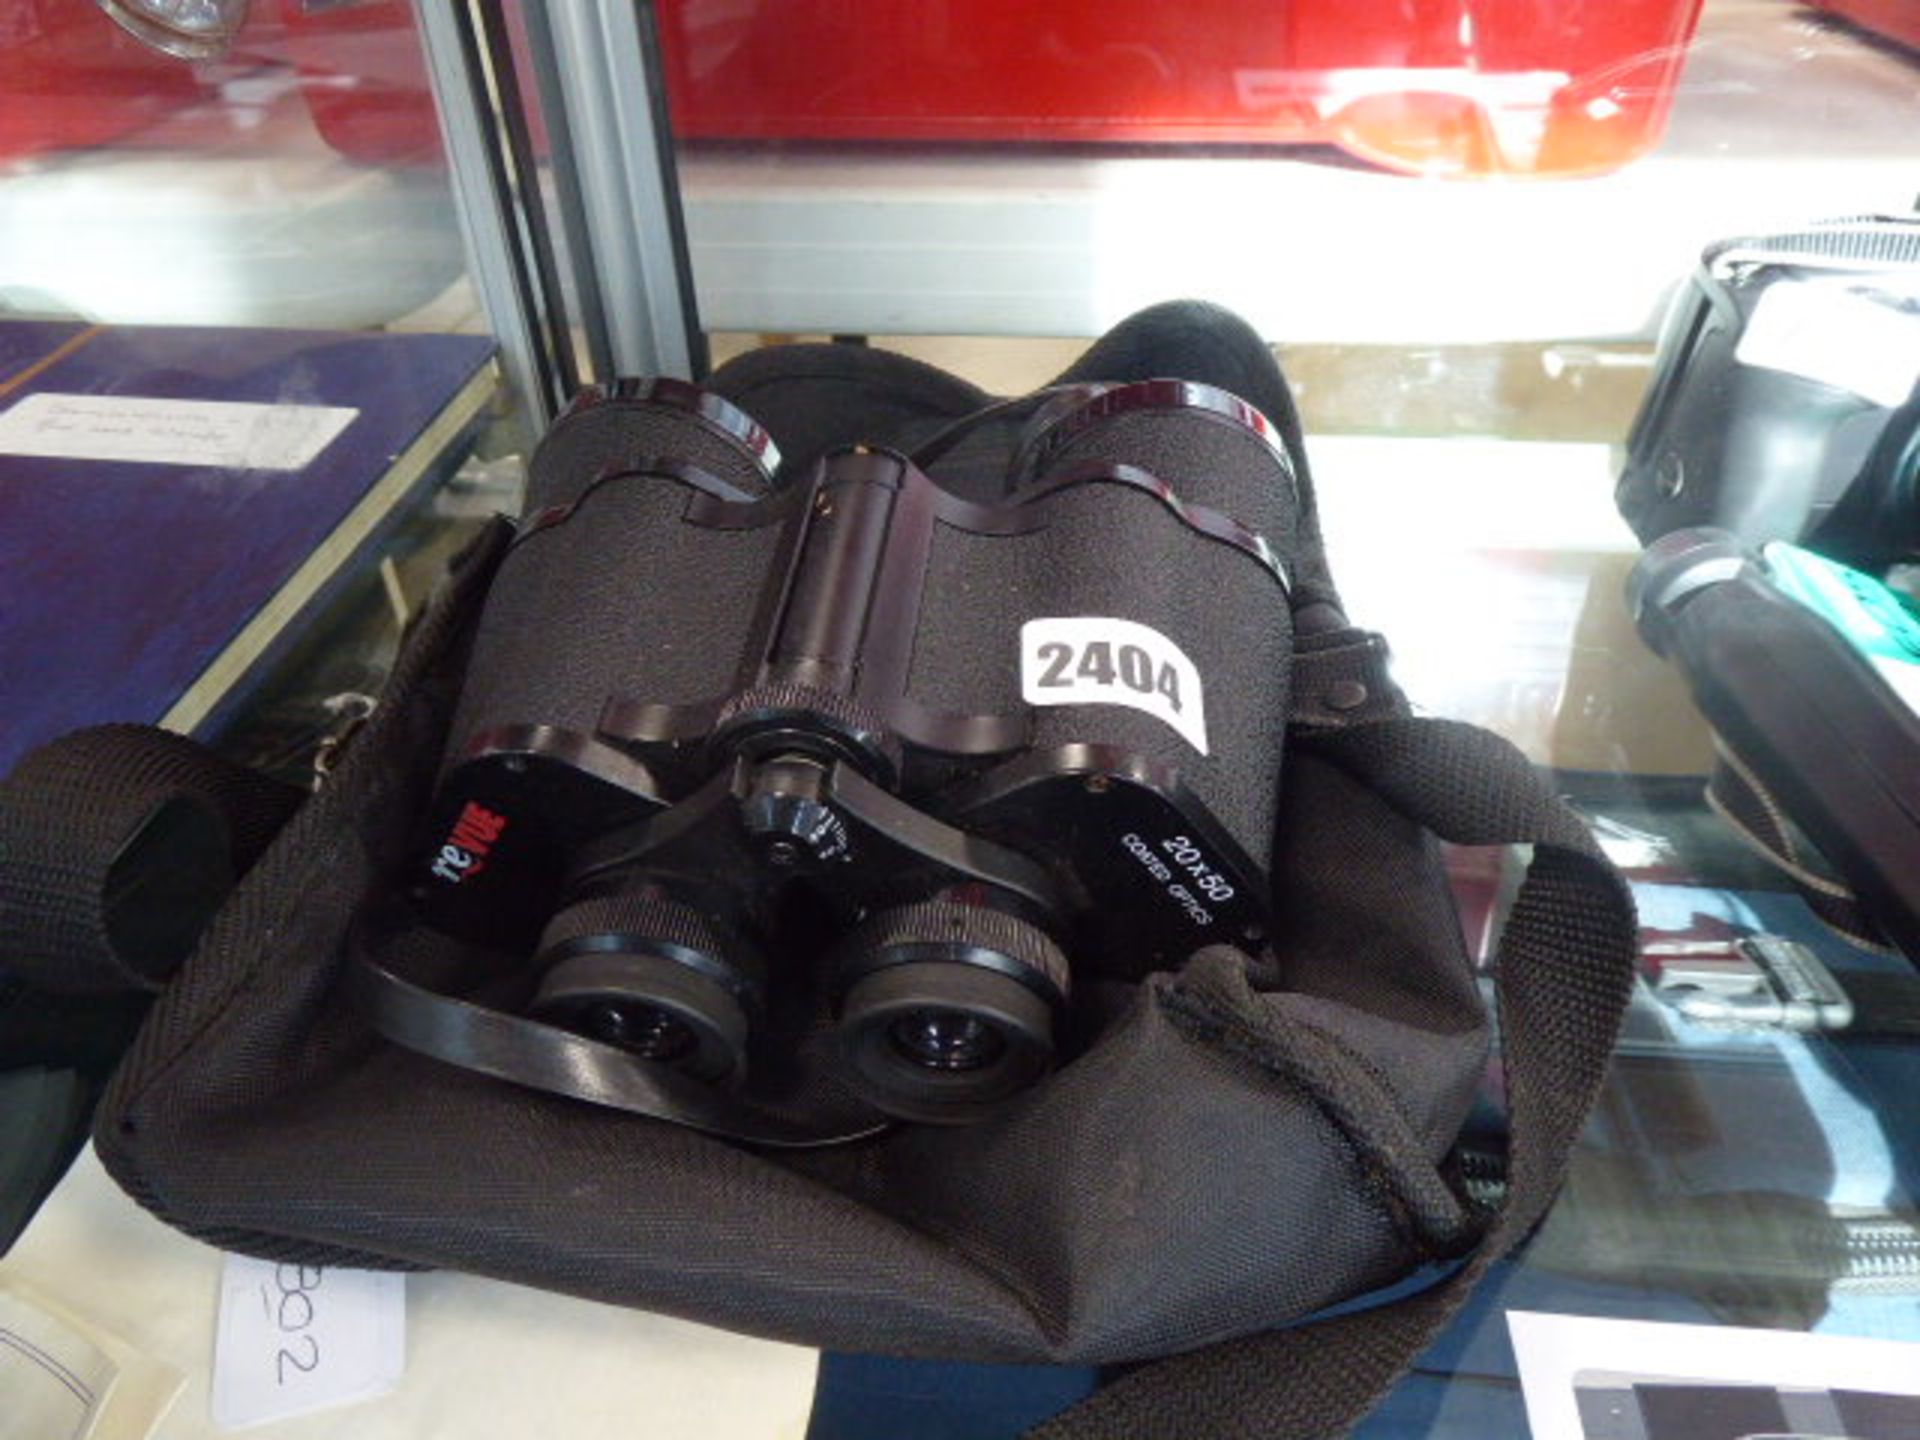 Pair of Rebue 20 x 50 binoculars with soft carry case